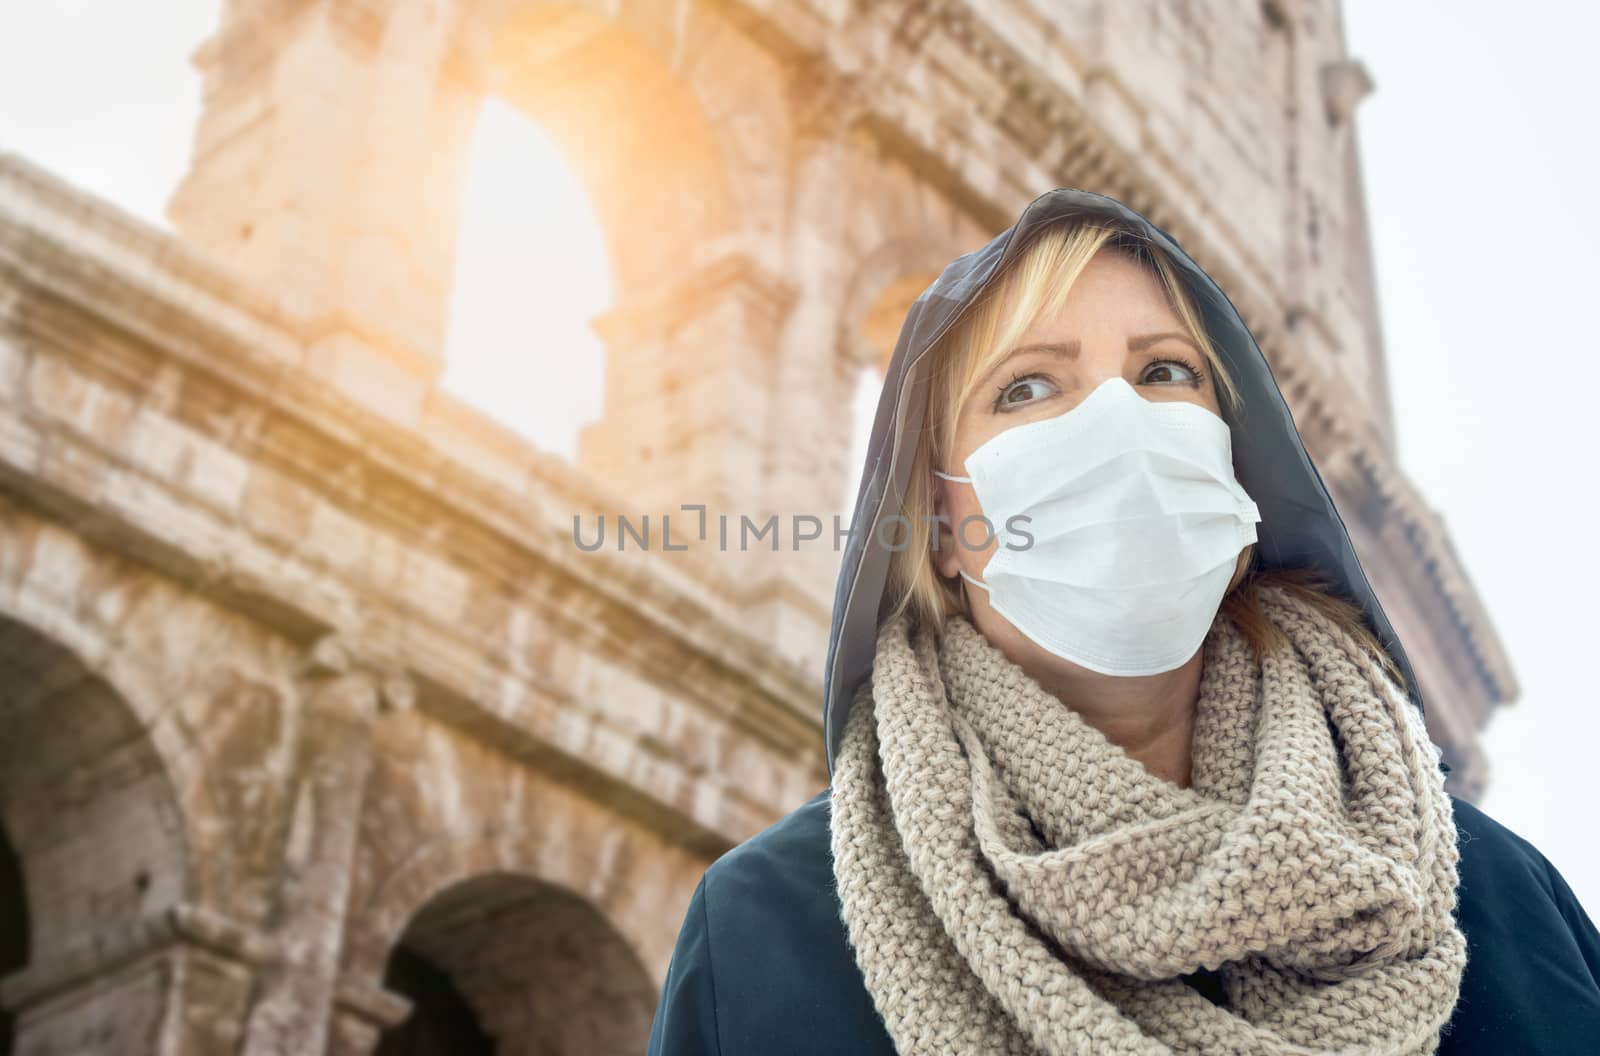 Young Woman Wearing Face Mask Walks Near the The Roman Coliseum In Rome, Italy.